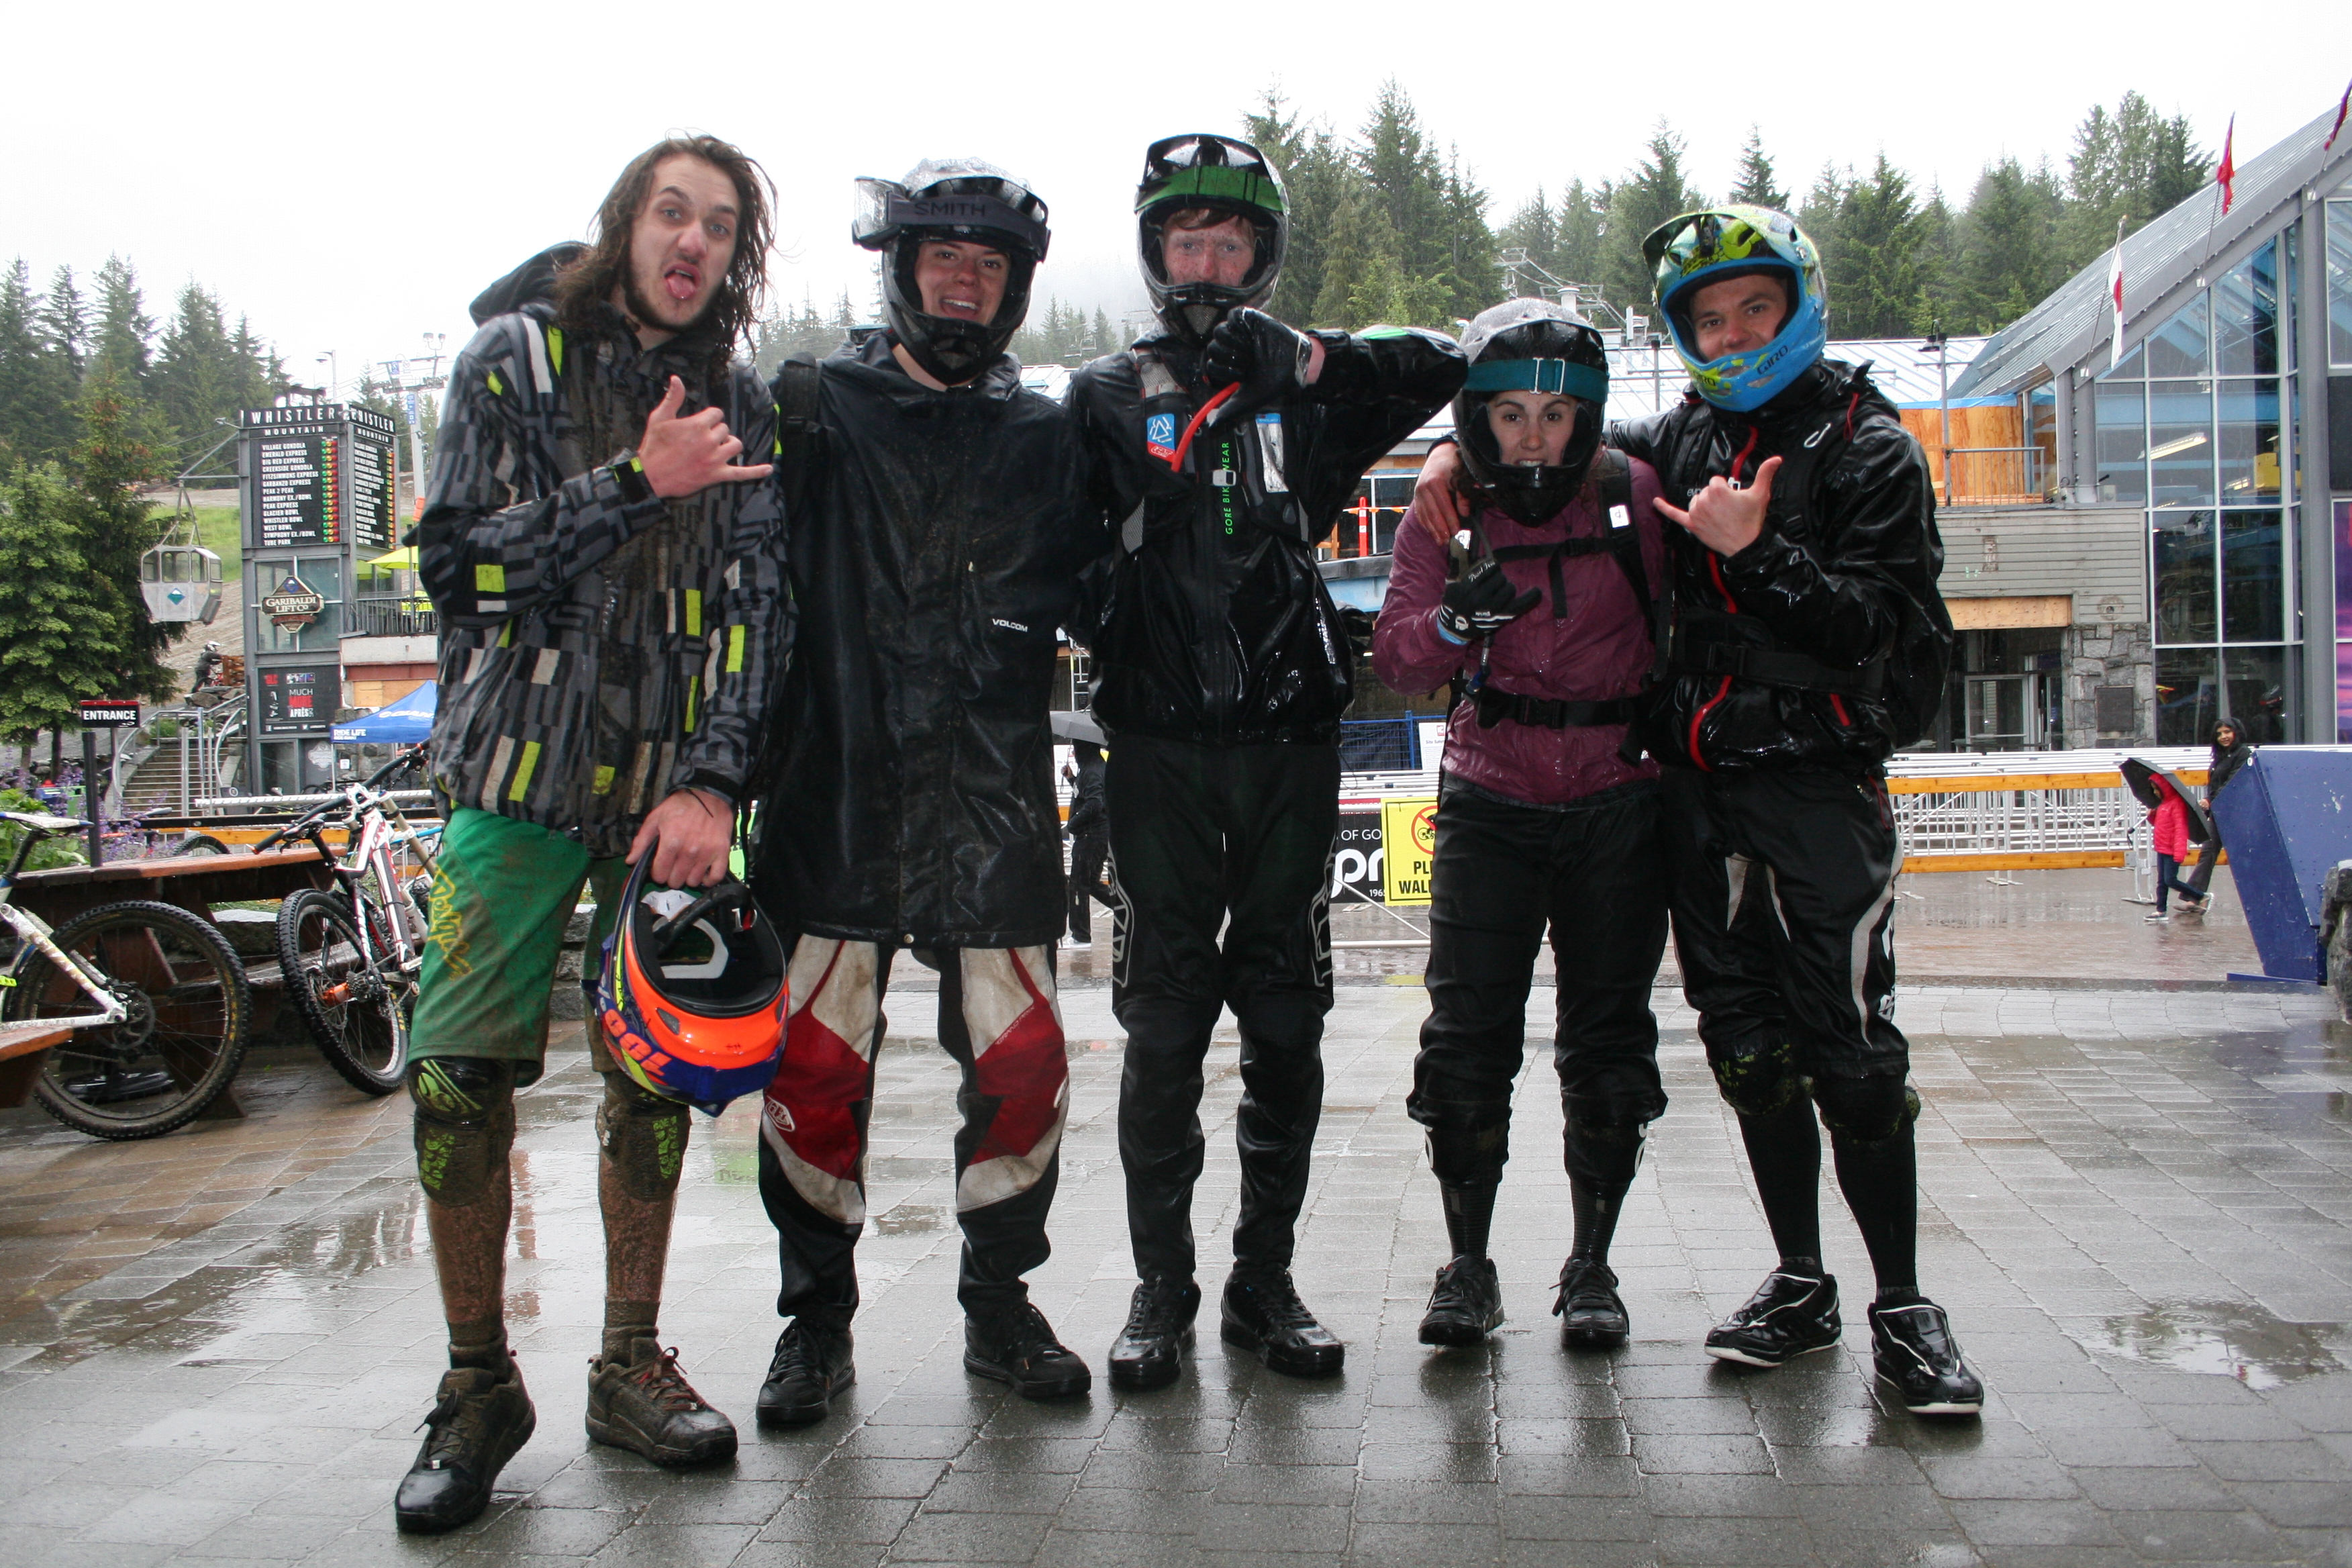 Off the mountain for a group photo despite being soaked through